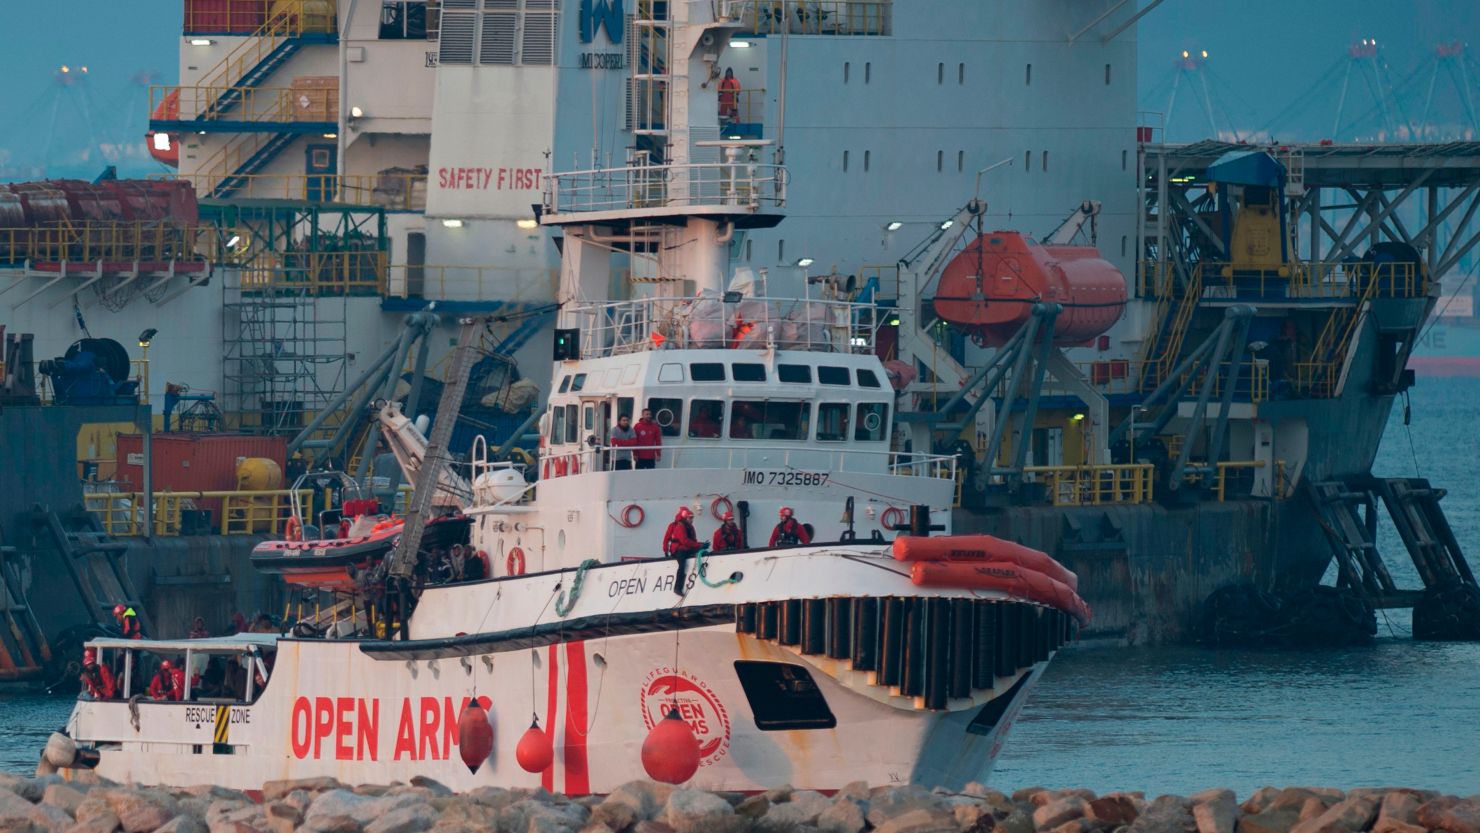 The ship of Spanish NGO Proactiva Open Arms arrives with 311 migrants on board in the southern Spanish port of Algeciras, in Campamento near San Roque, on December 28.